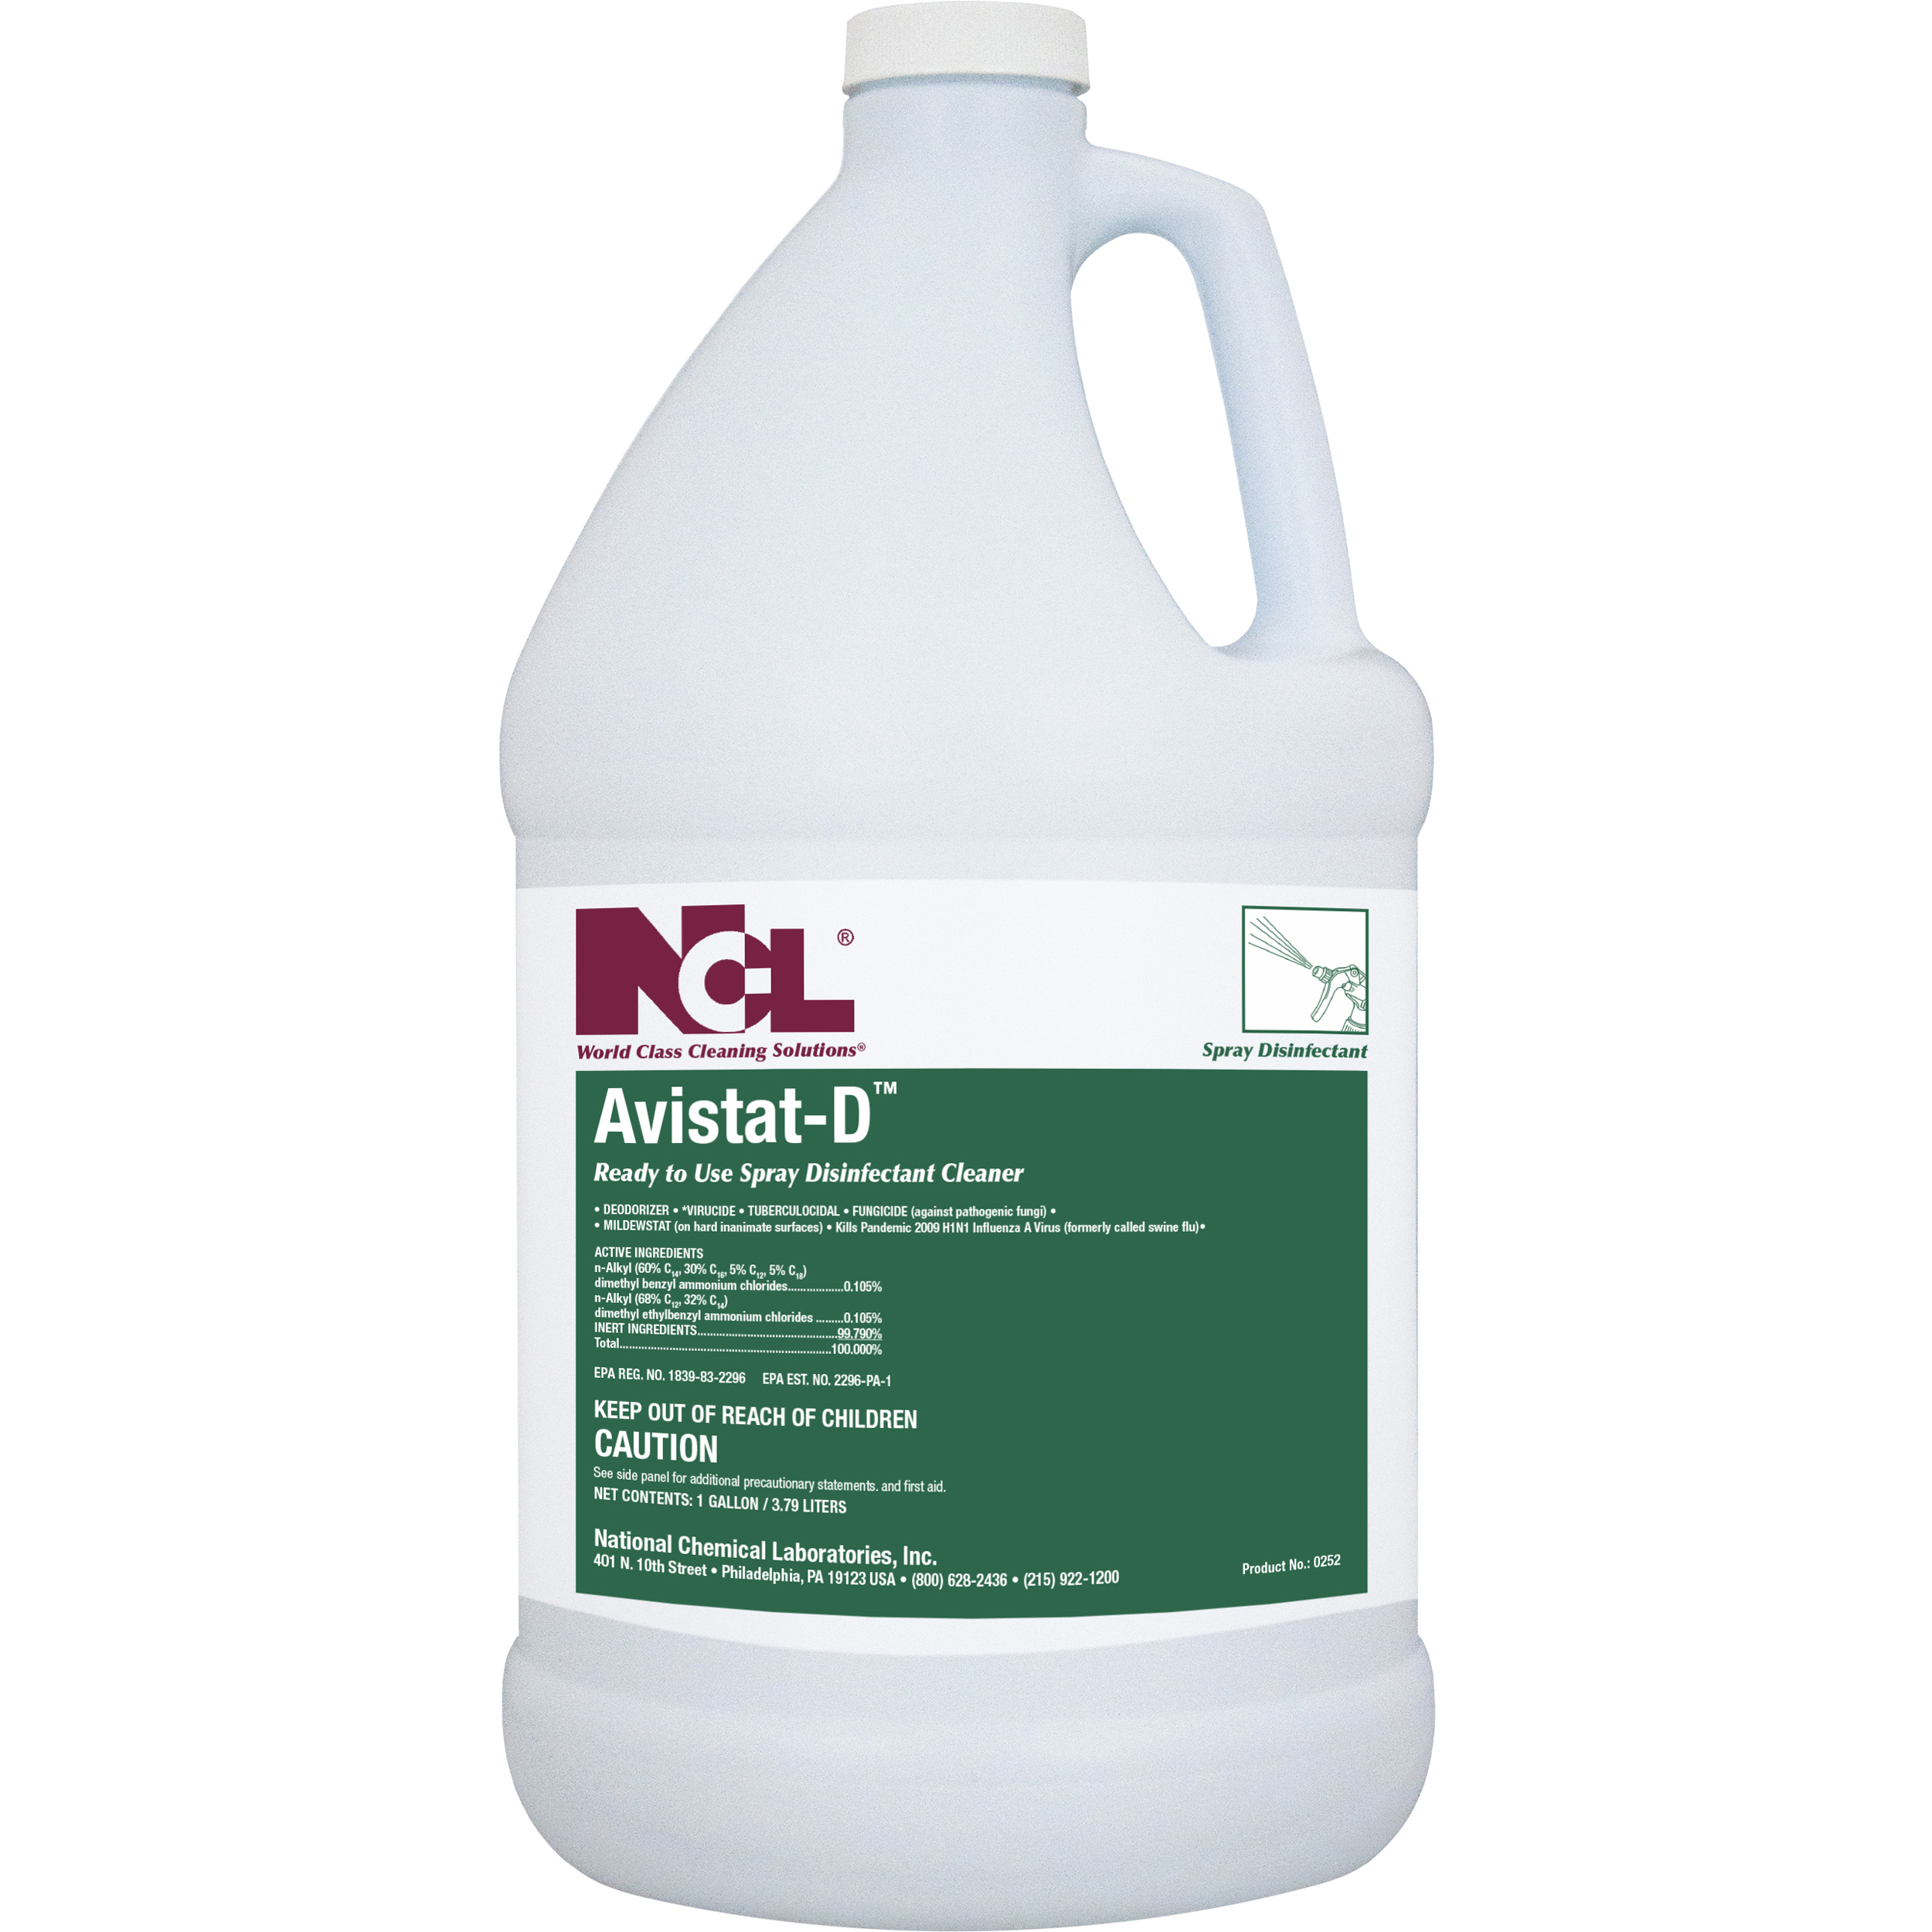  AVISTAT-D Ready-To-Use Spray Disinfectant Cleaner 4/1 Gallon Case (NCL0252-29) 